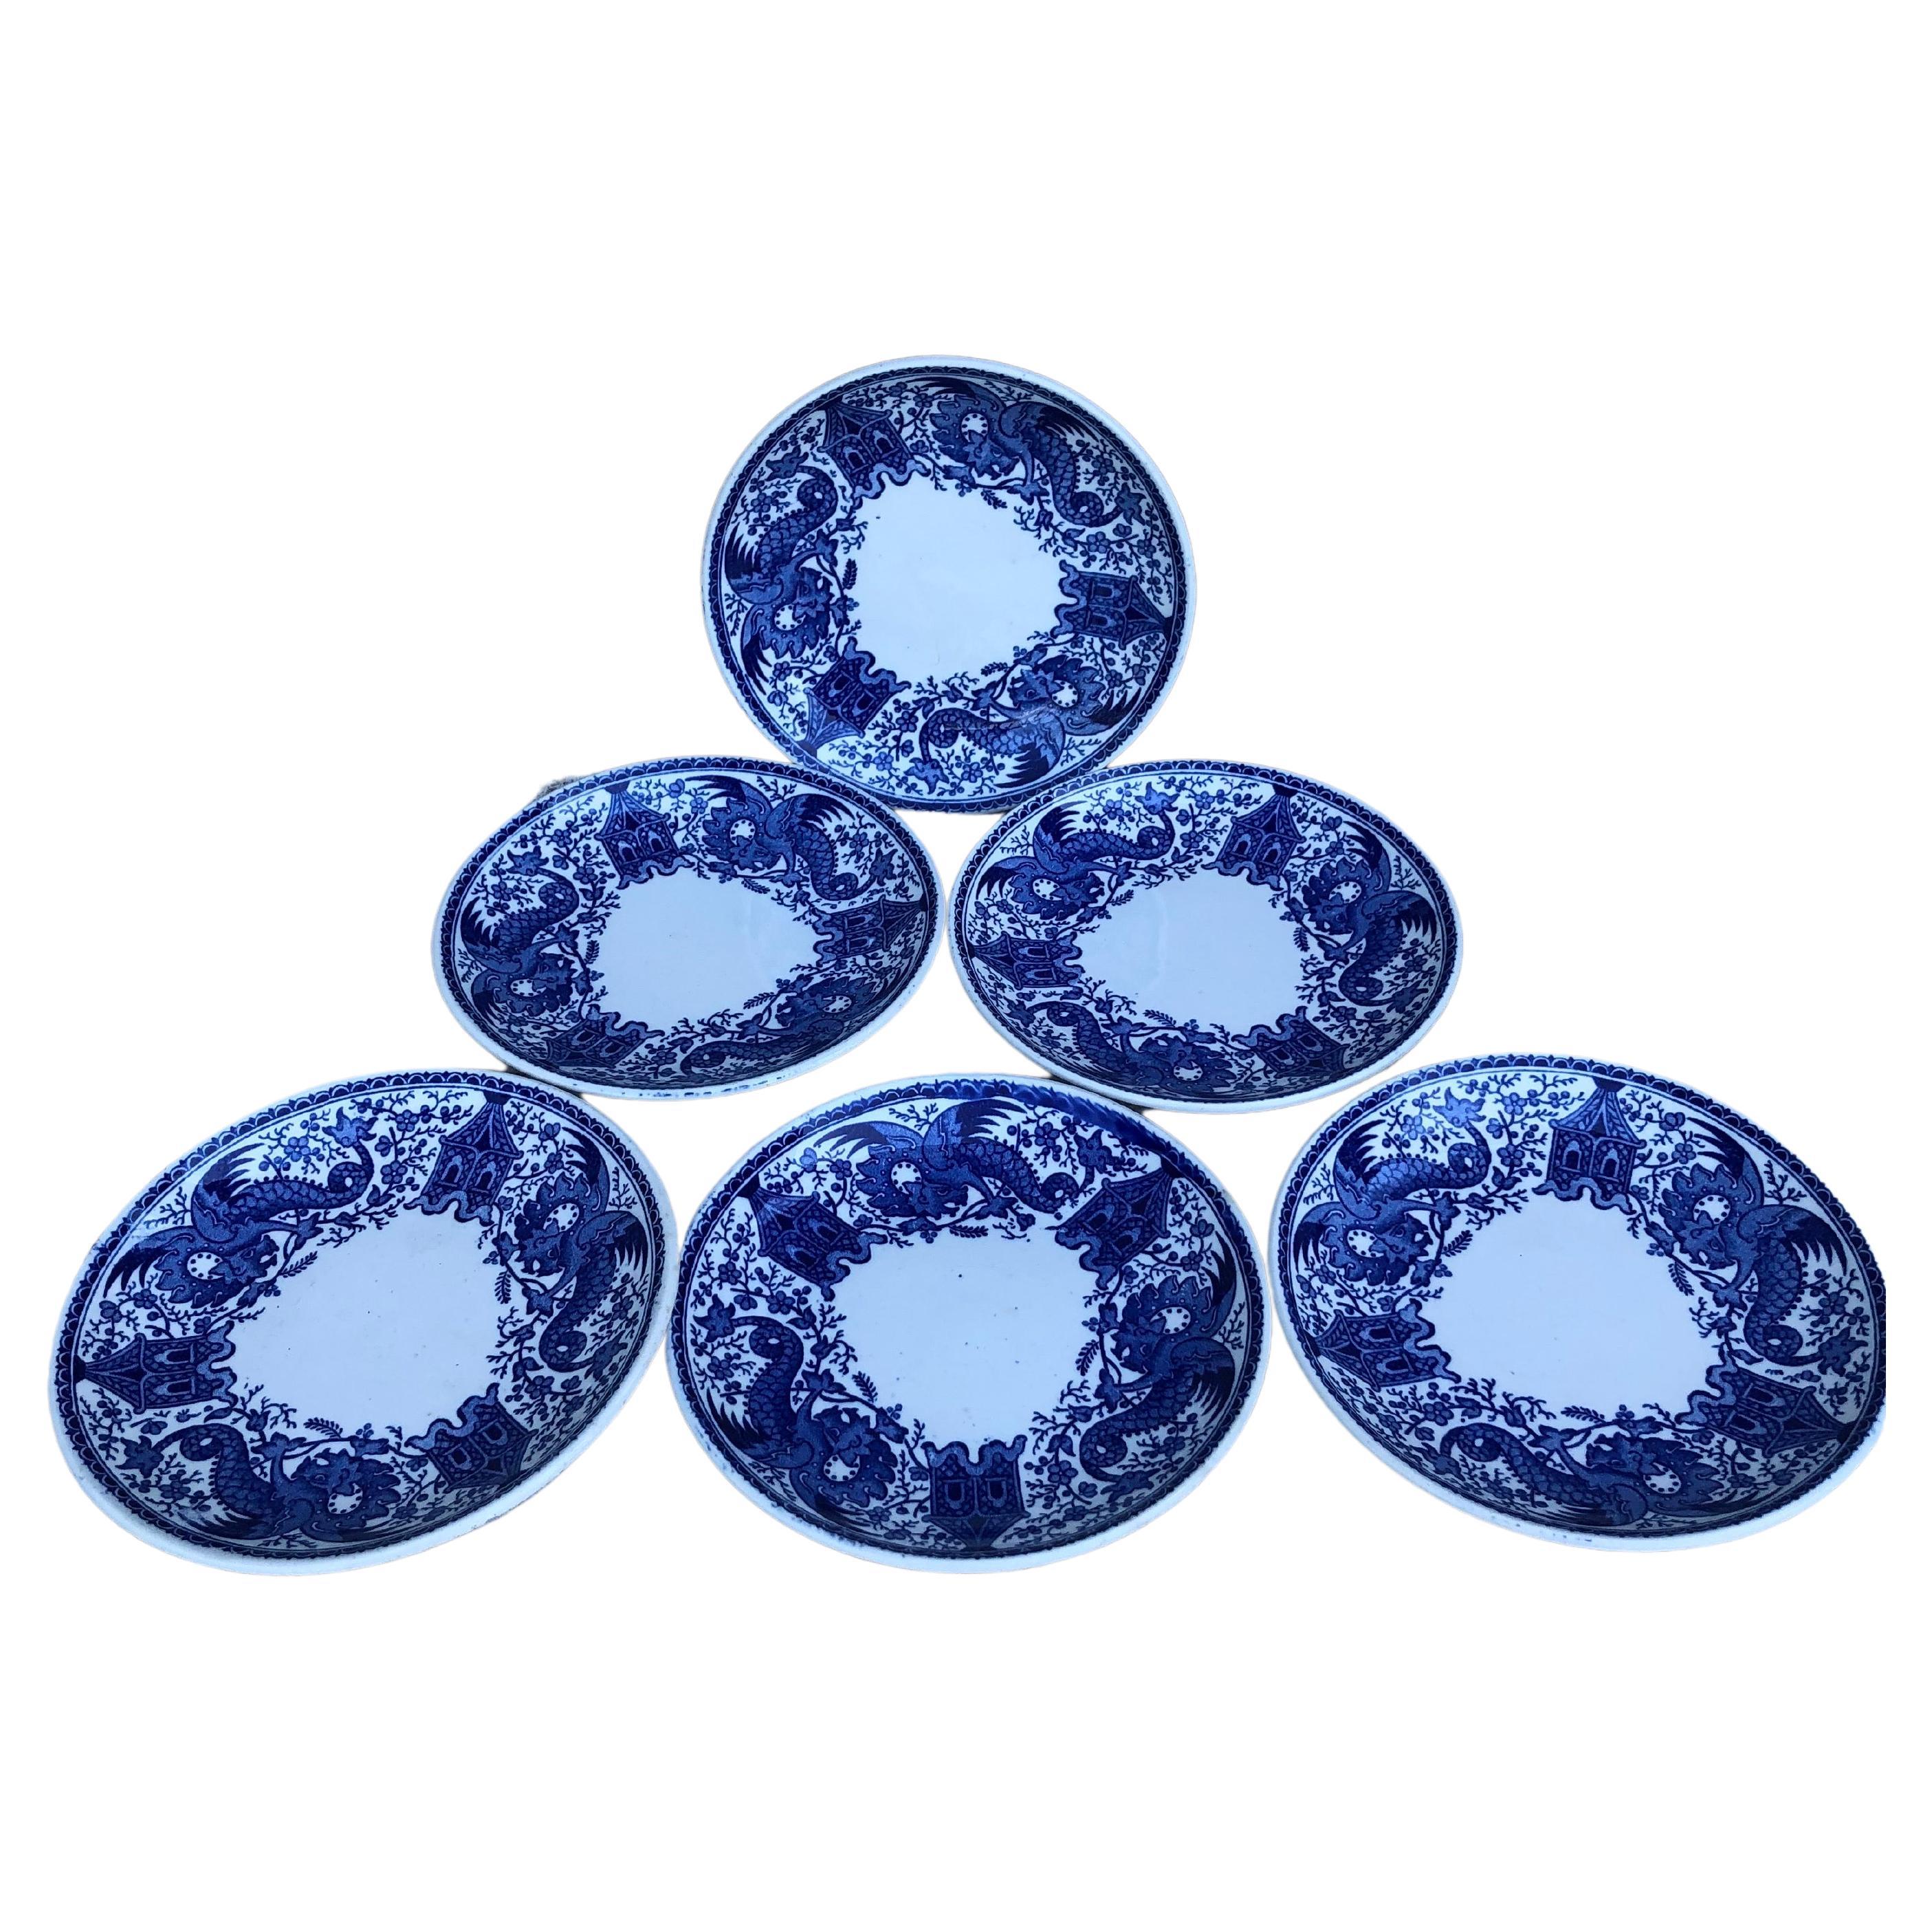 Set of 6 Small Blue & White Small Plates Dragons Sarreguemines For Sale